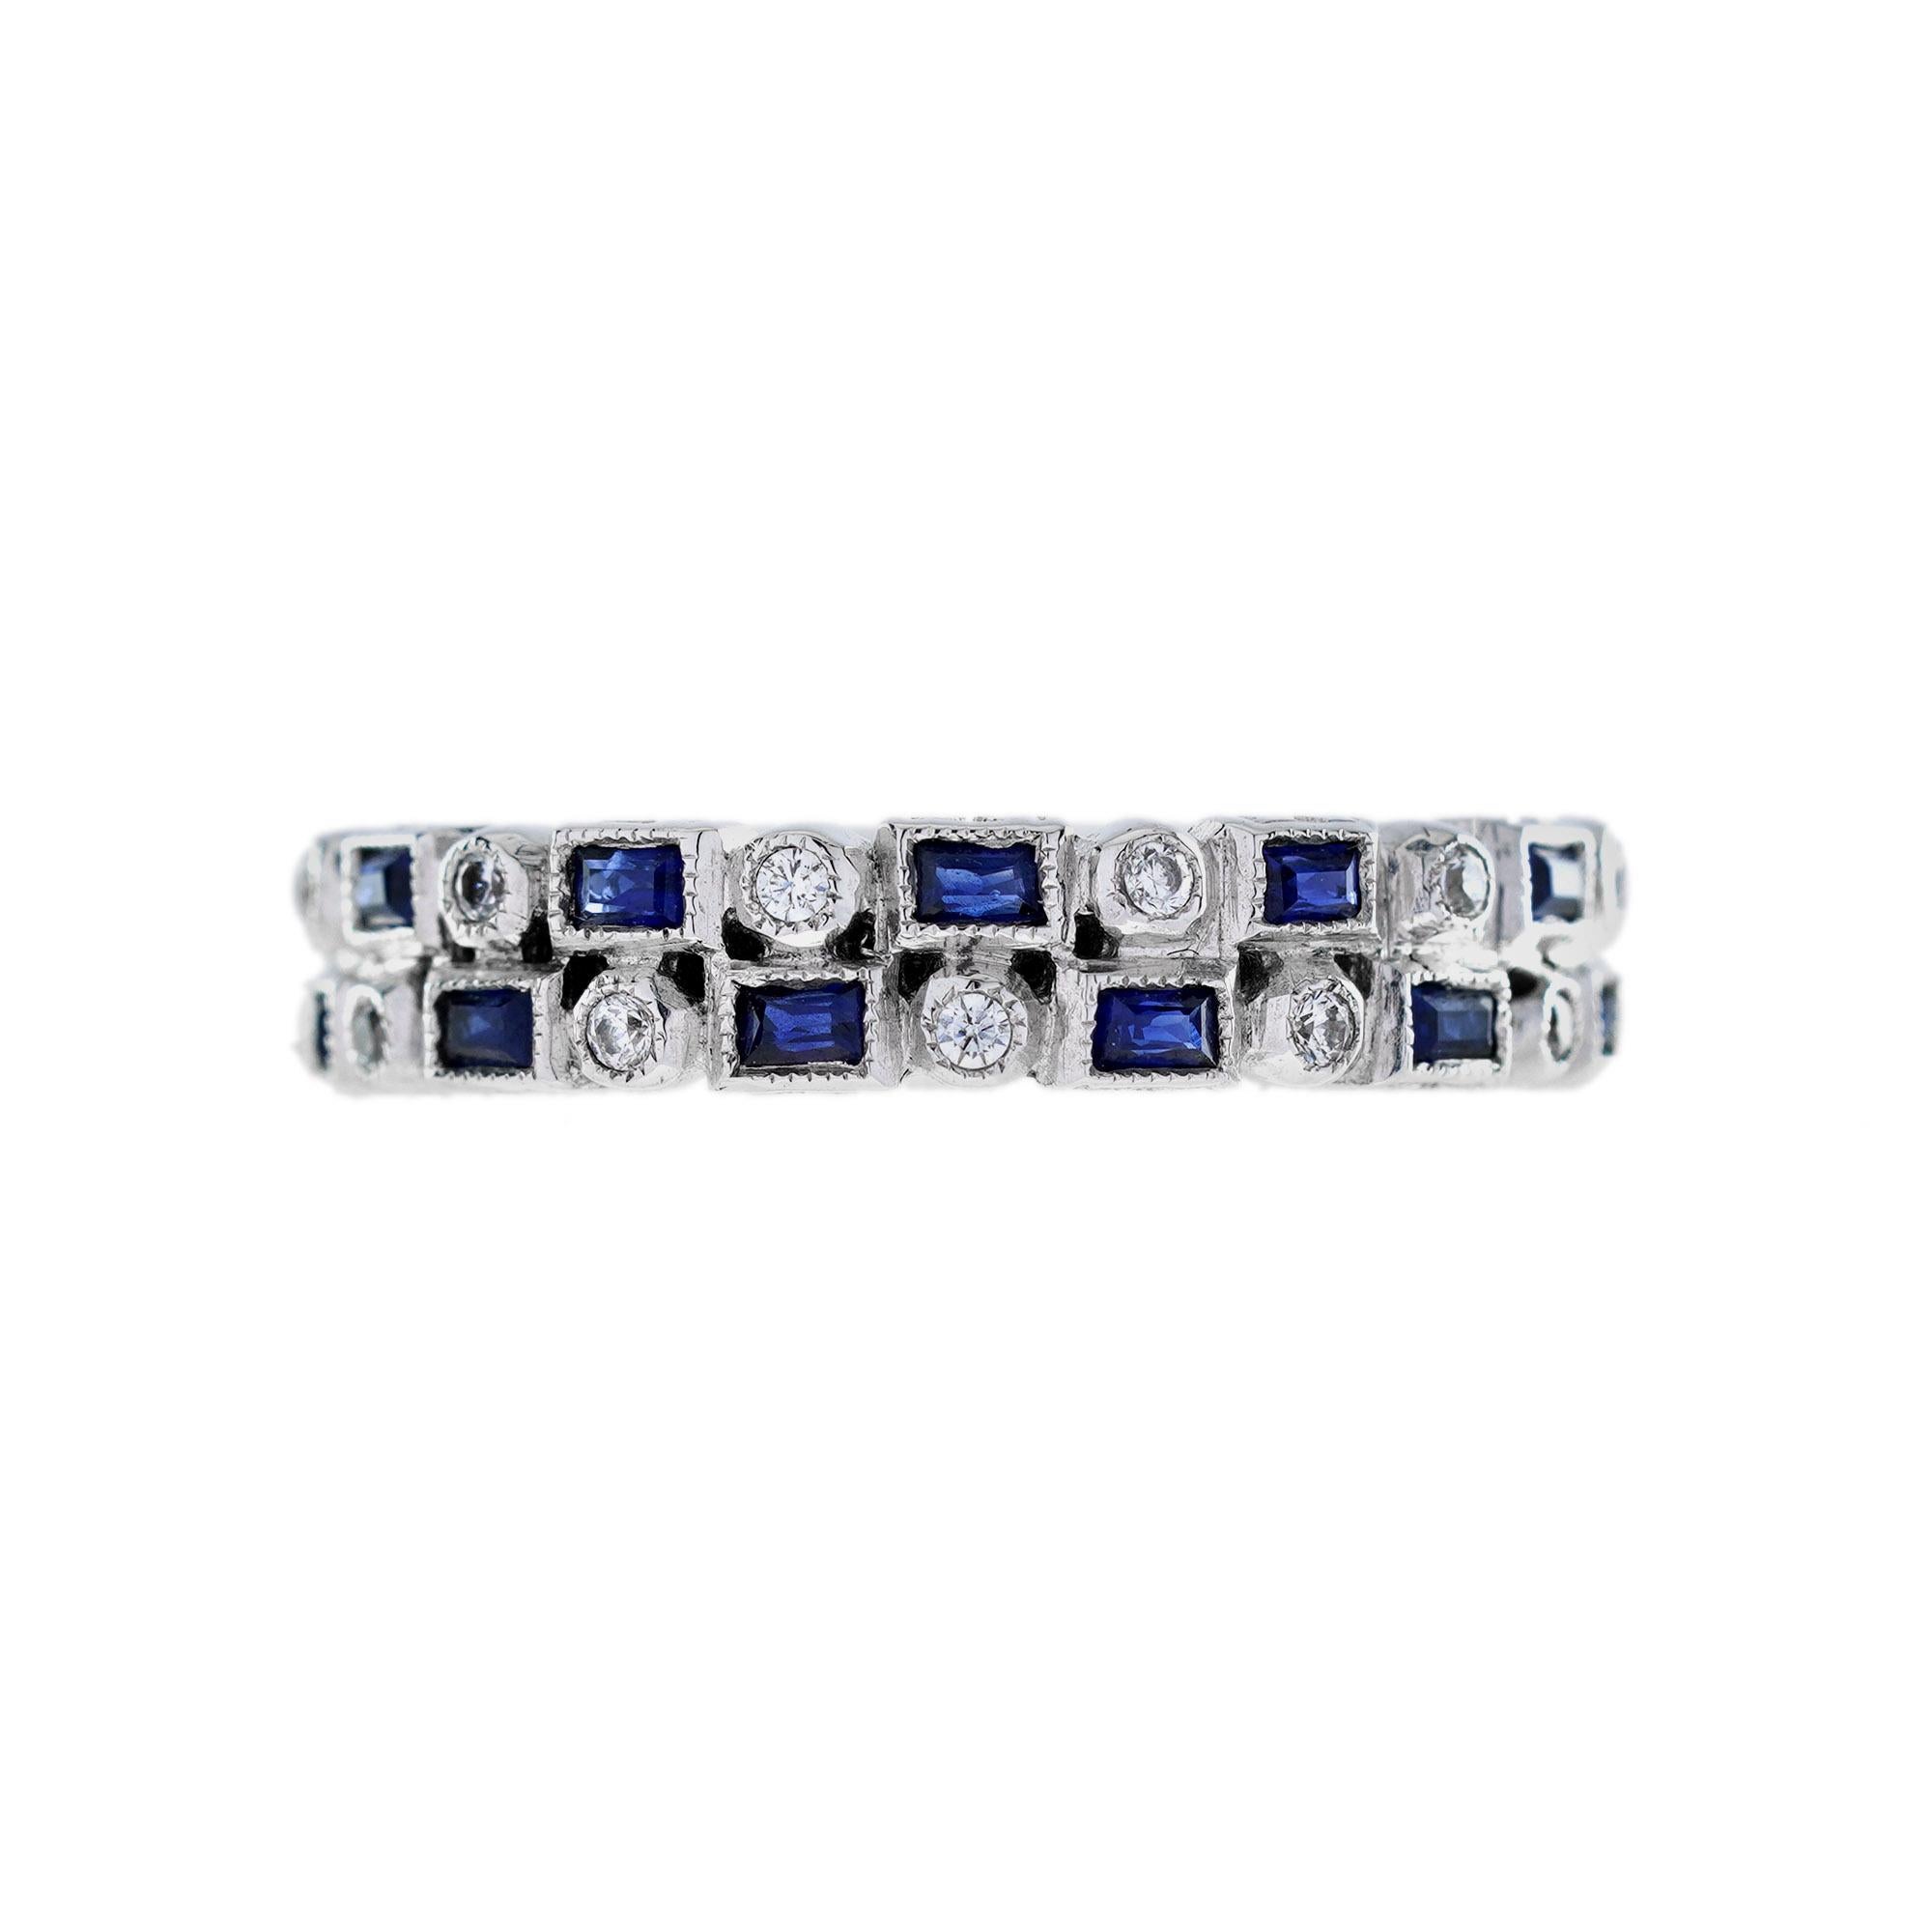 For Sale:  Diamond and Blue Sapphire Art Deco Style Half Eternity Ring in 14K White Gold 3